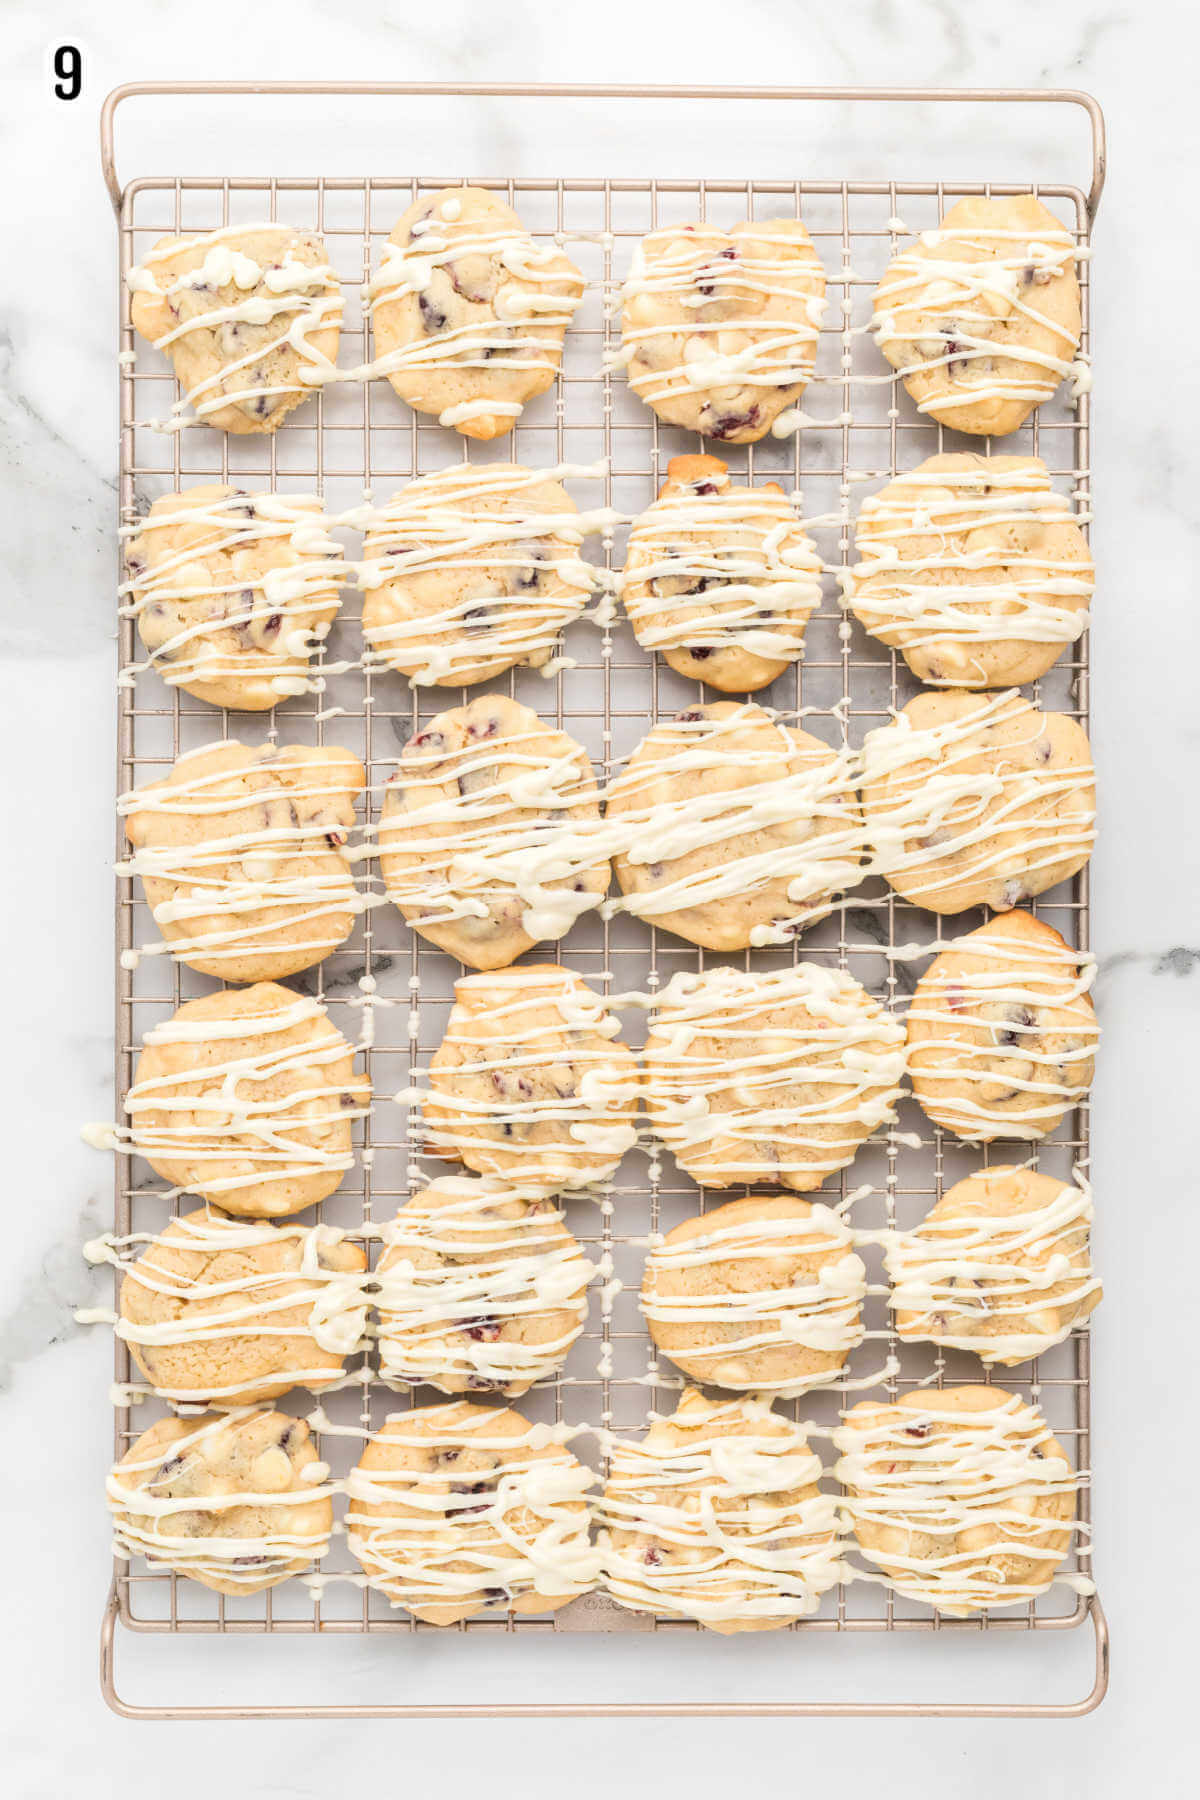 Cranberry White Chocolate Chip Cookies drizzled with white chocolate glaze and drying on a wire rack. 